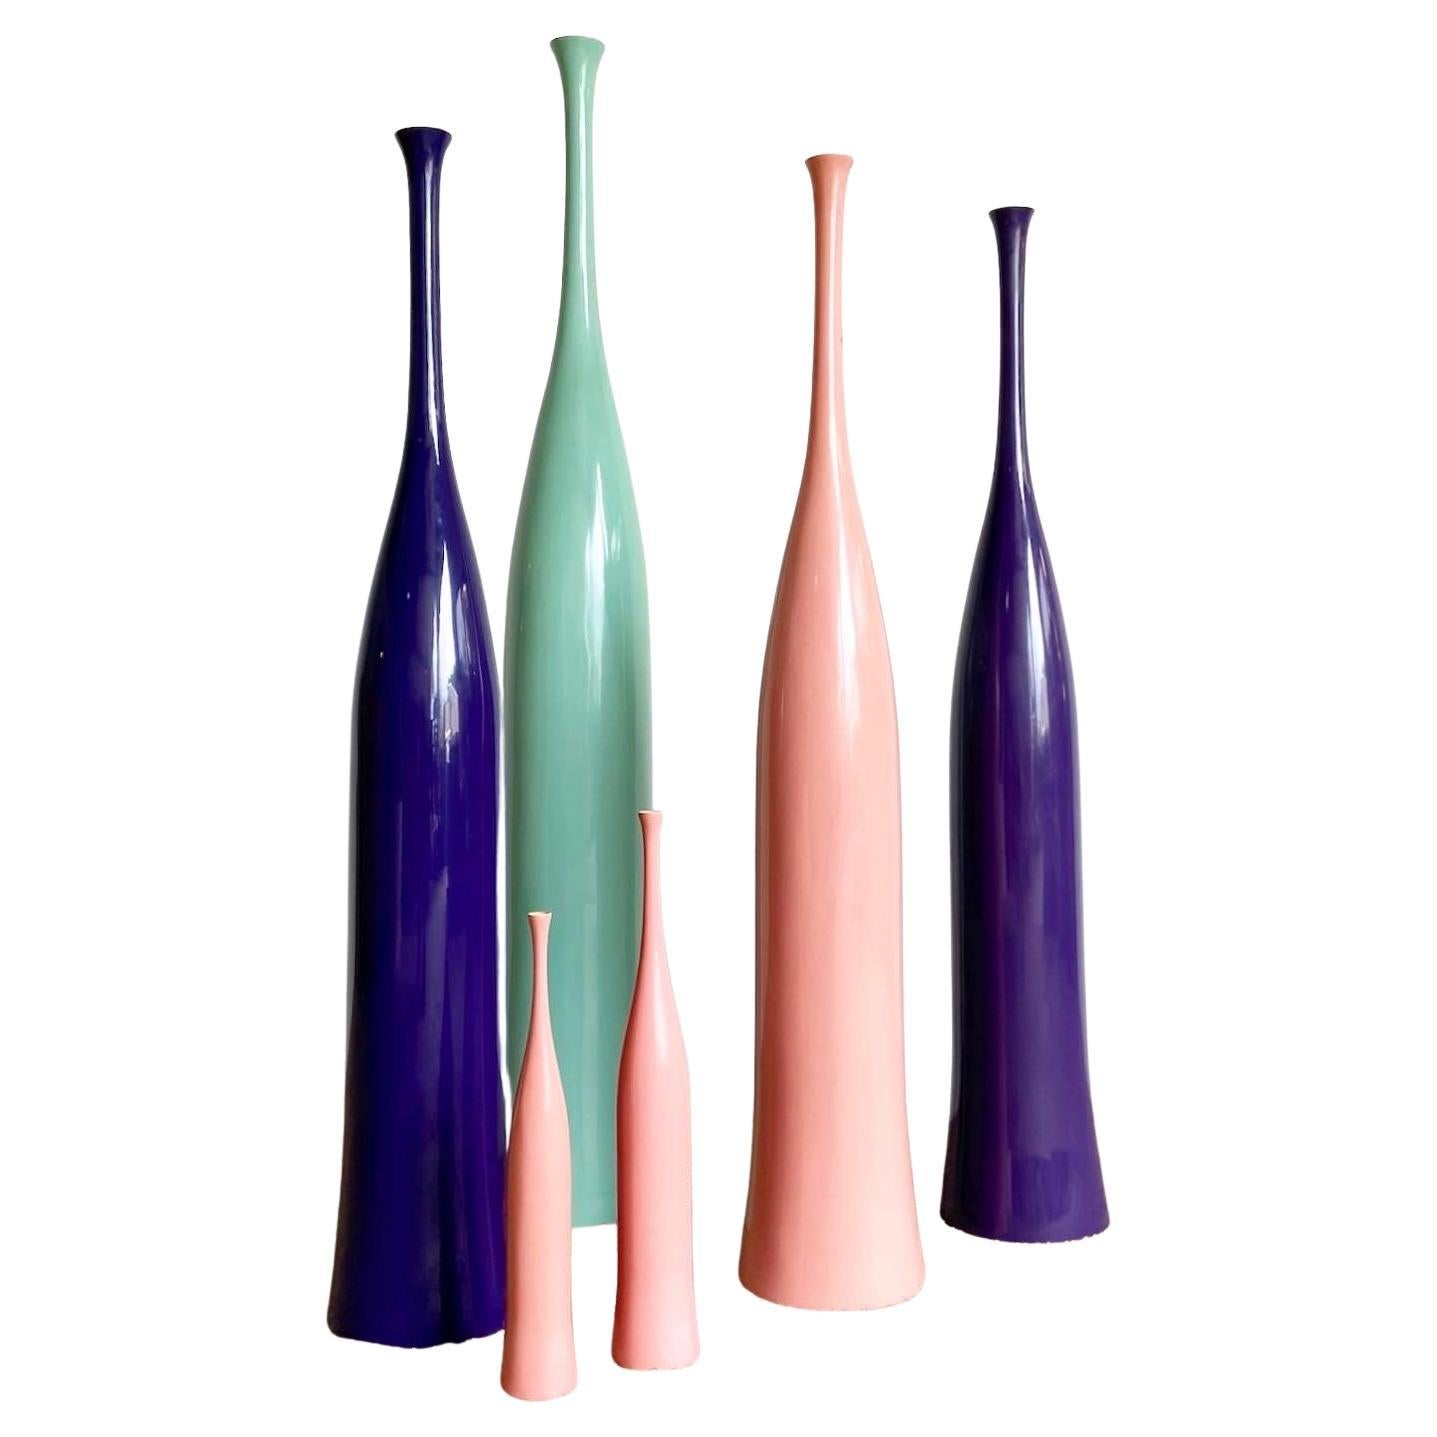 Postmodern Vases by Oggetti in Pink, Purple, and Teal - 6 Pieces